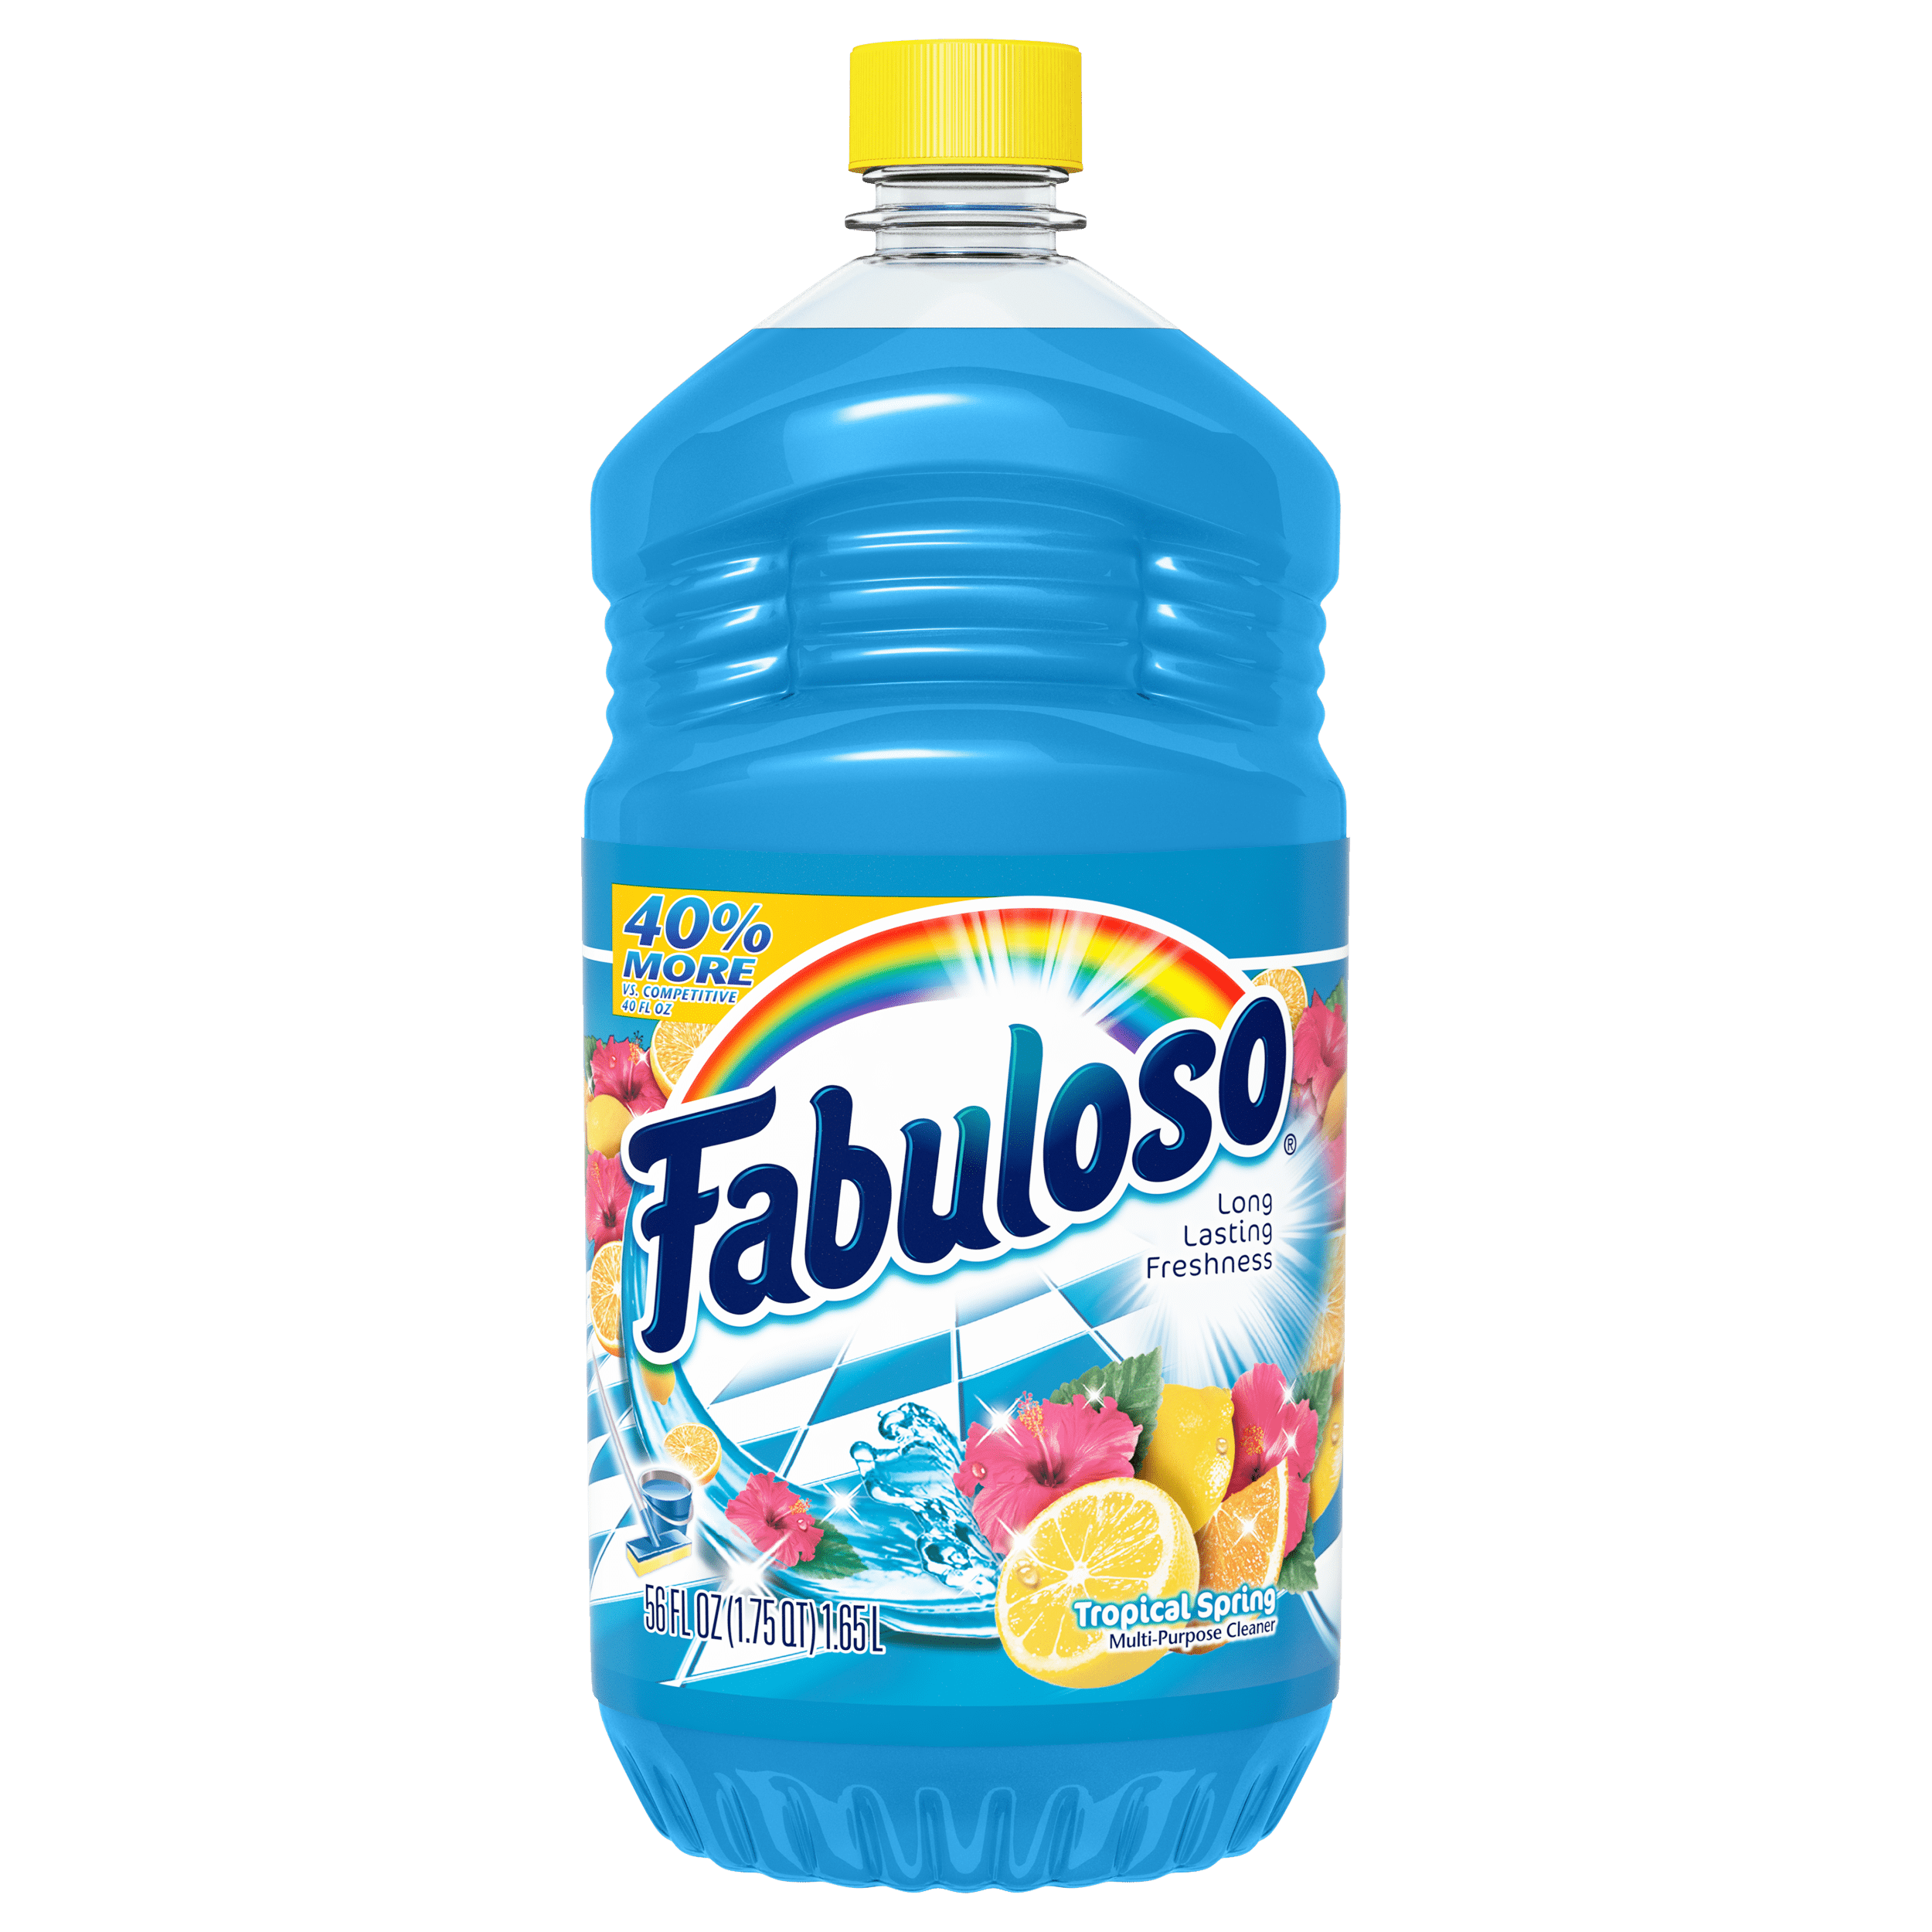 Buy Fabuloso All Purpose Cleaner, Tropical Spring, 56 Oz Online at